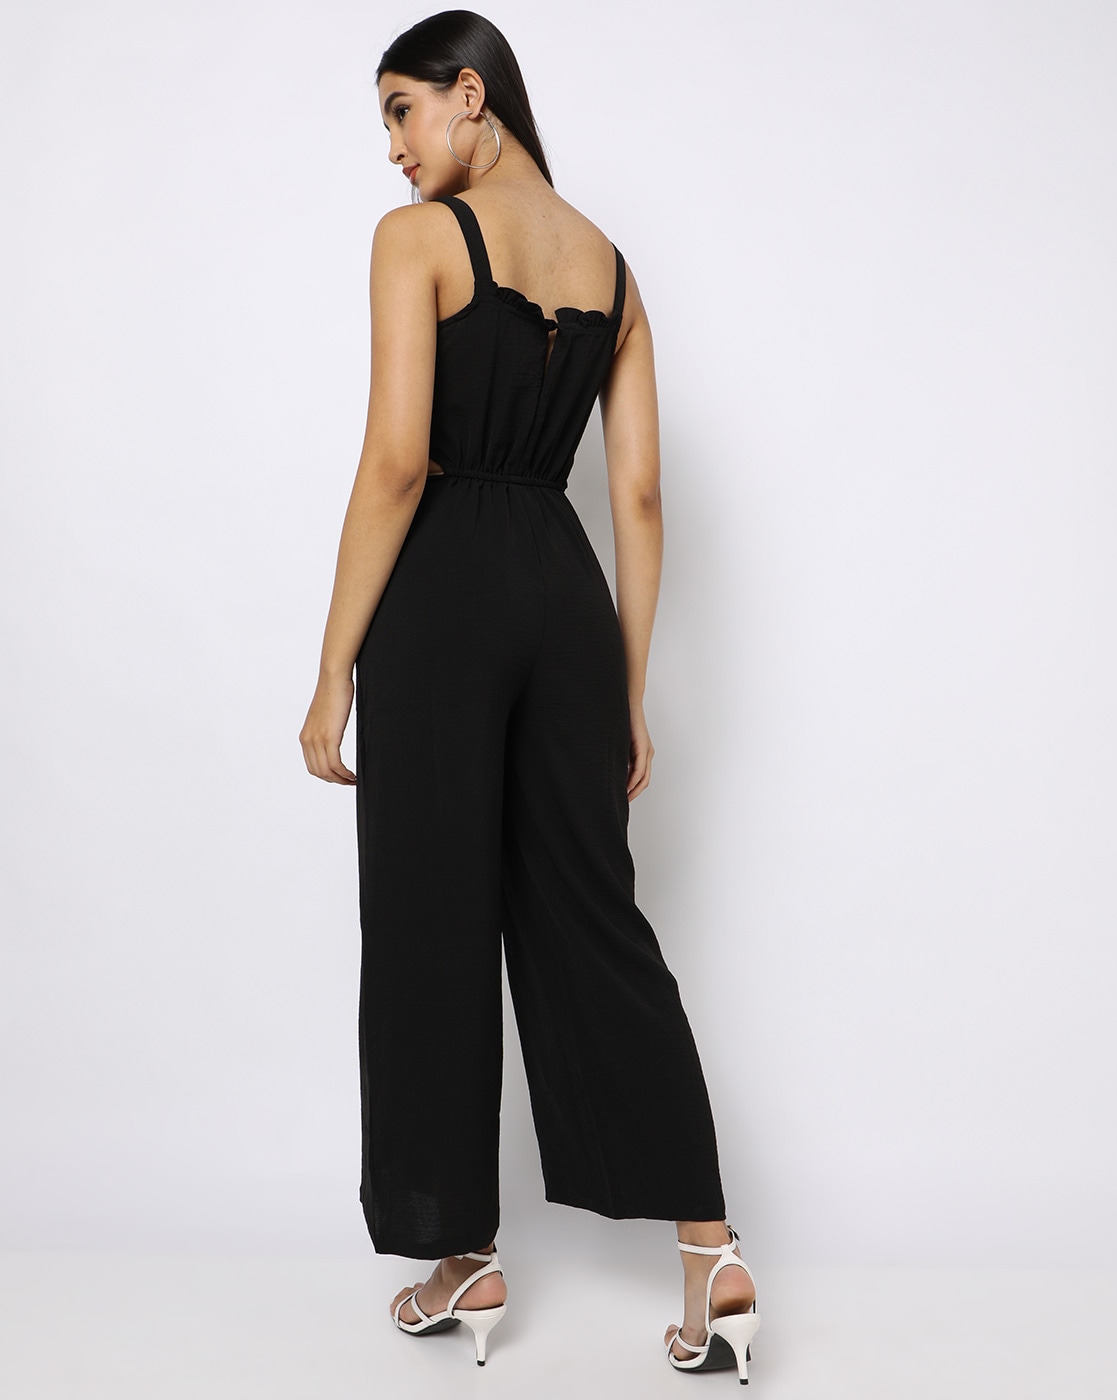 Stone Woven Corset Cut Out Waist Strappy Jumpsuit